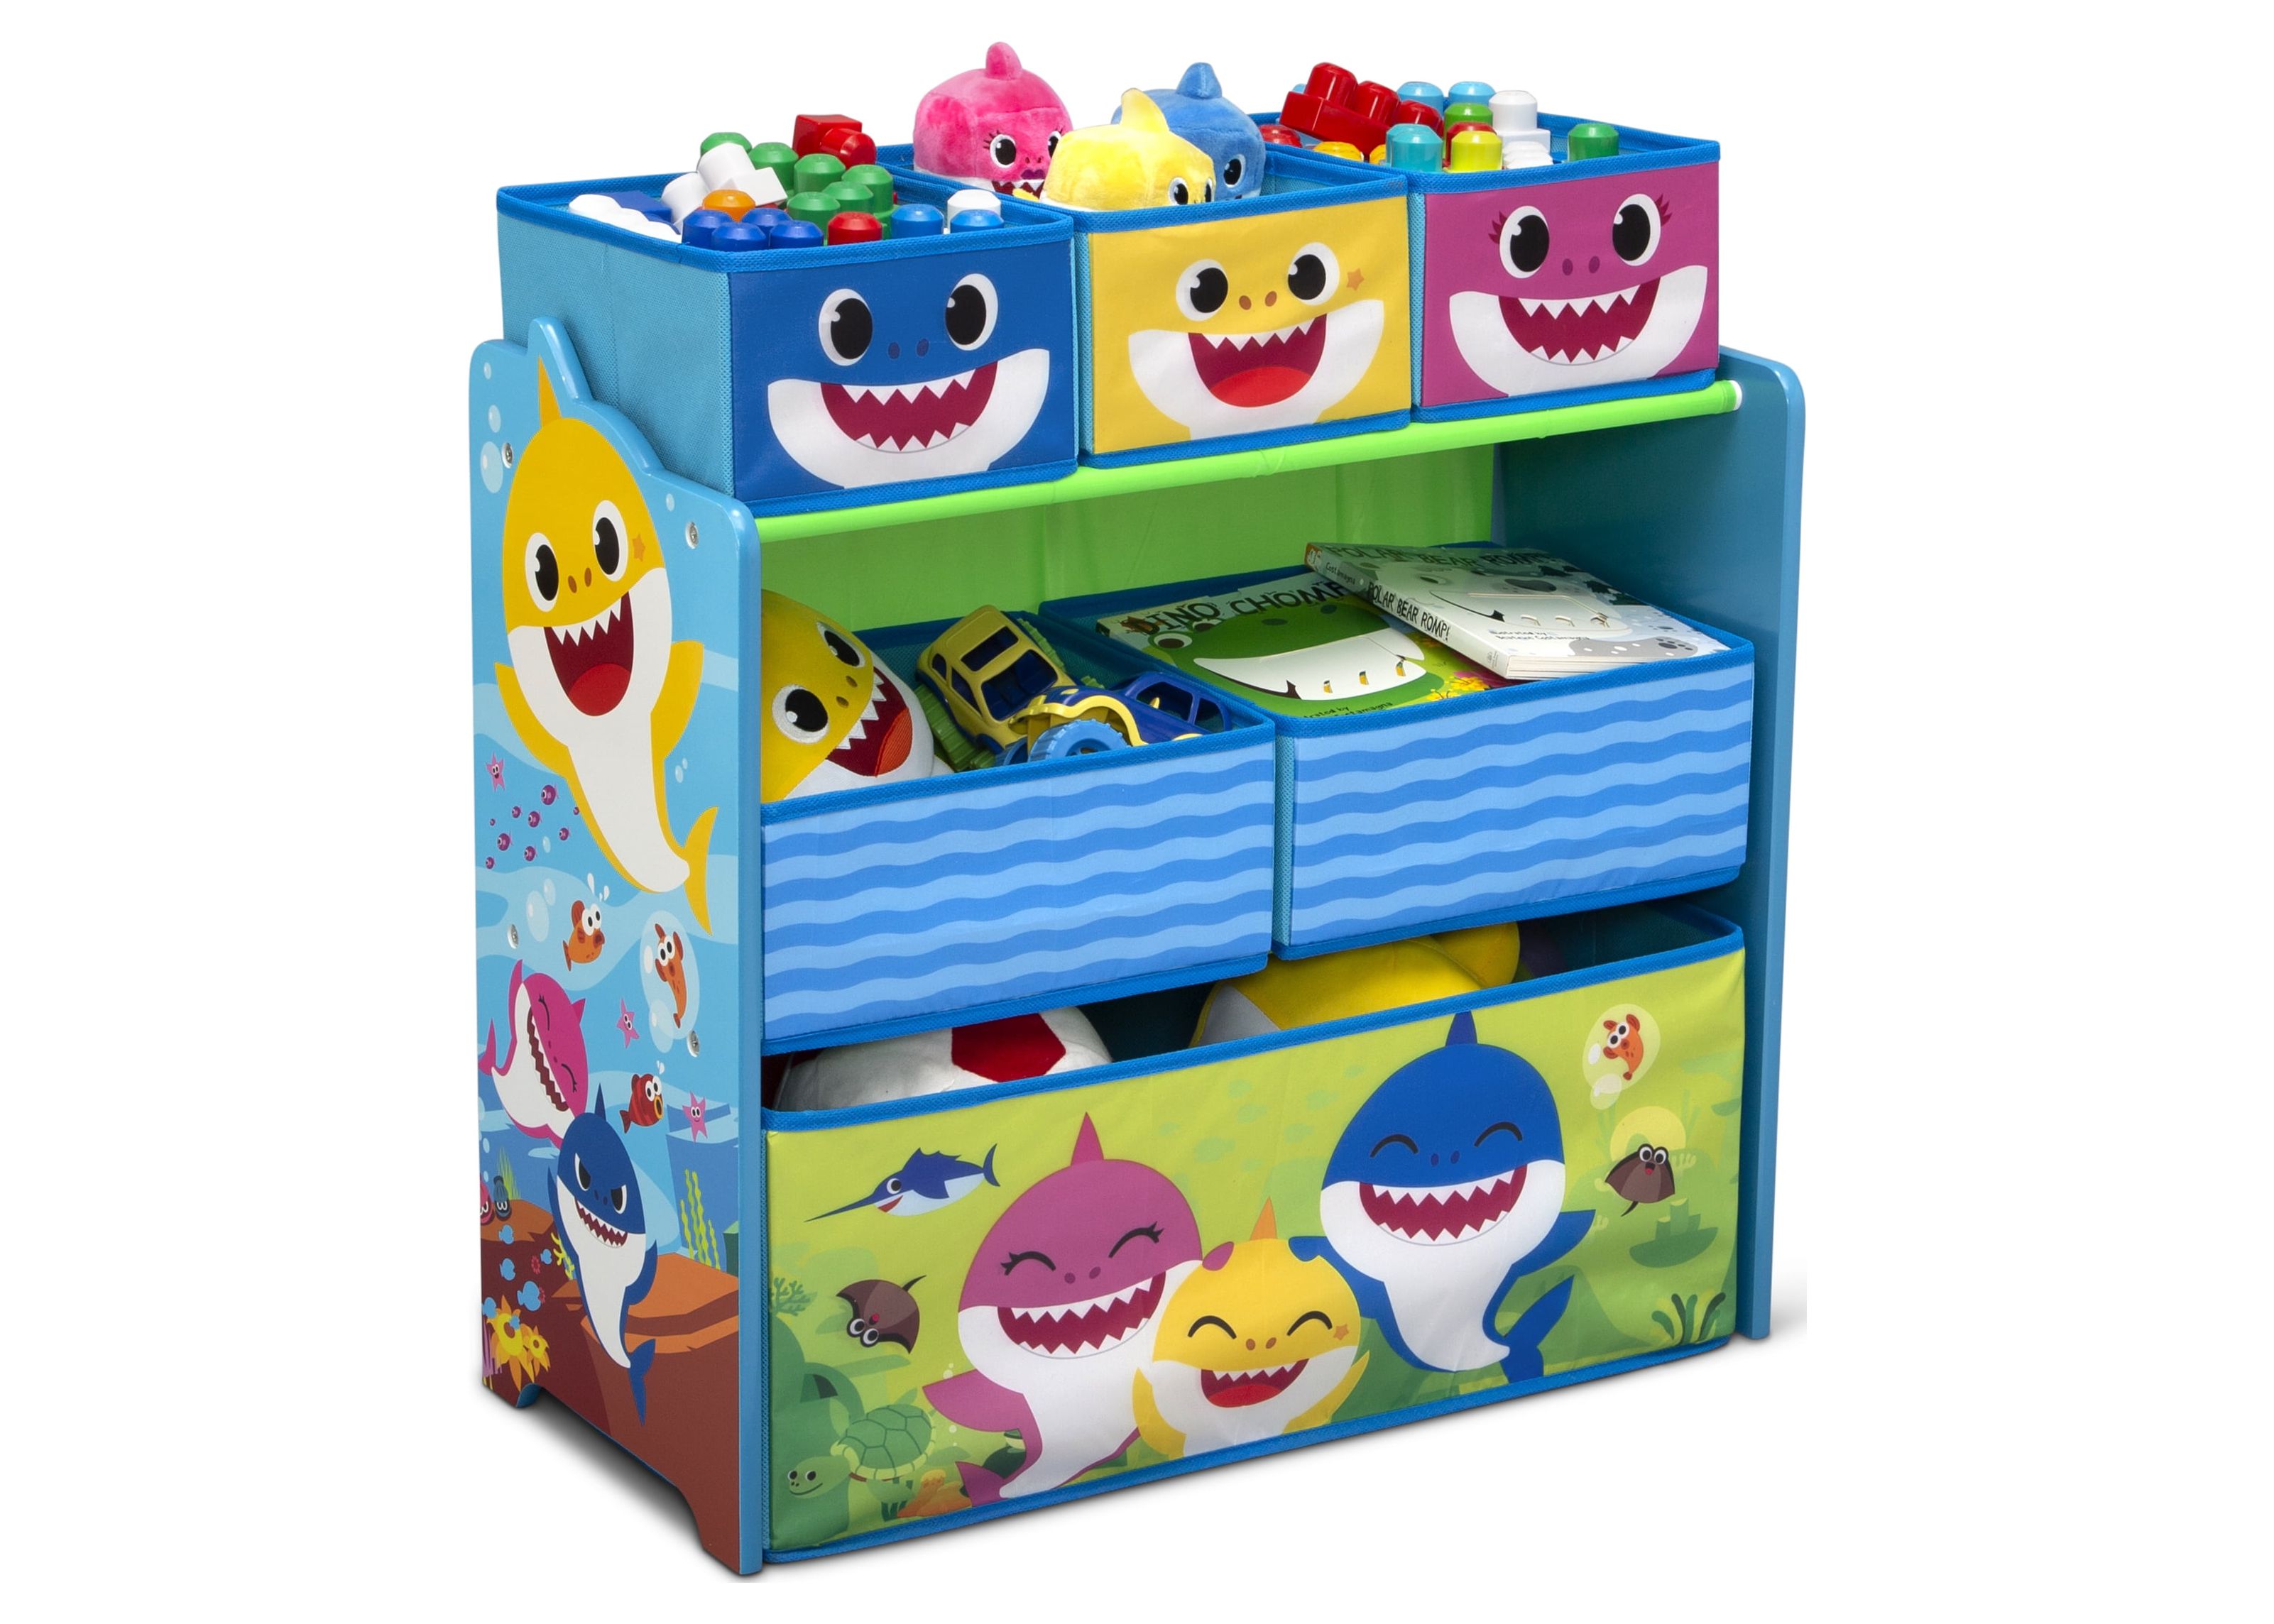 Baby Shark 4-Piece Room-in-a-Box Bedroom Set by Delta Children - Includes Sleep & Play Toddler Bed, 6 Bin Design & Store Toy Organizer and Art Desk with Chair - image 5 of 19